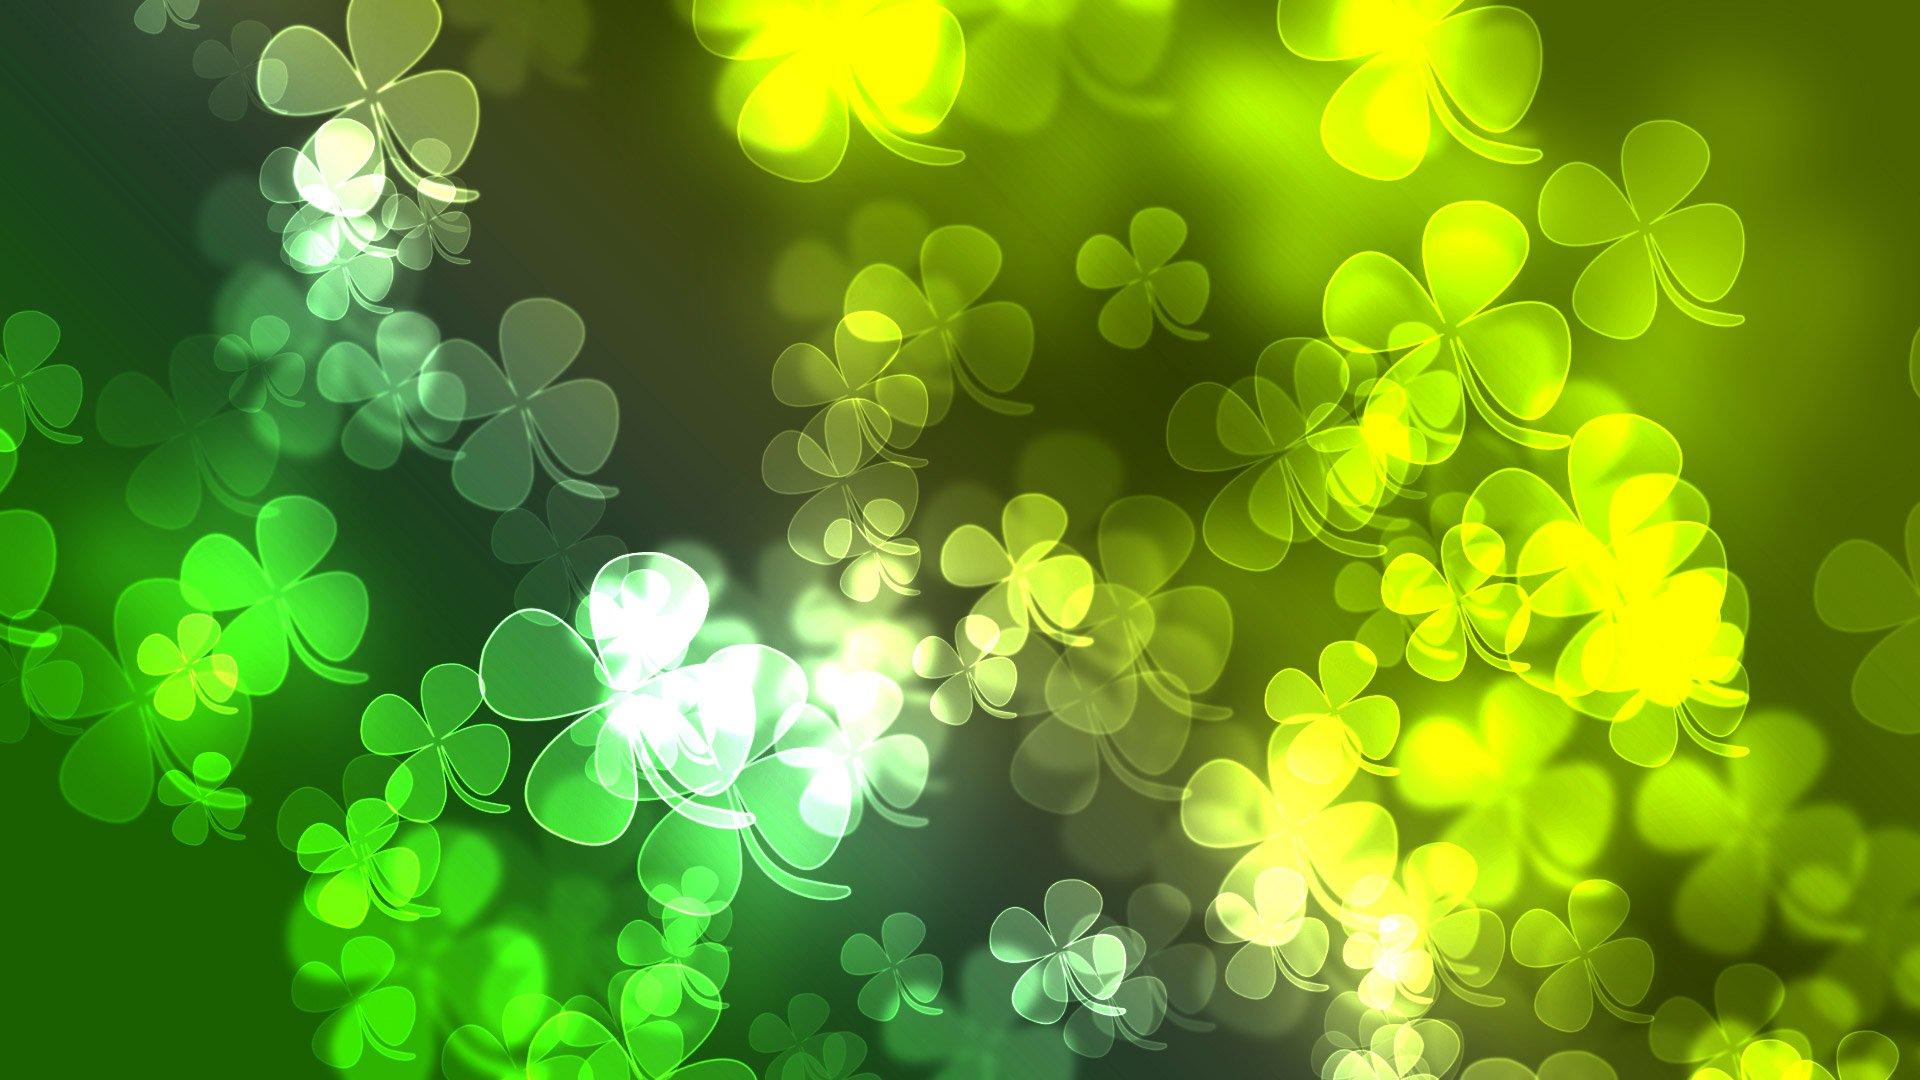 St. Patrick's Day themed wallpaper for your Android